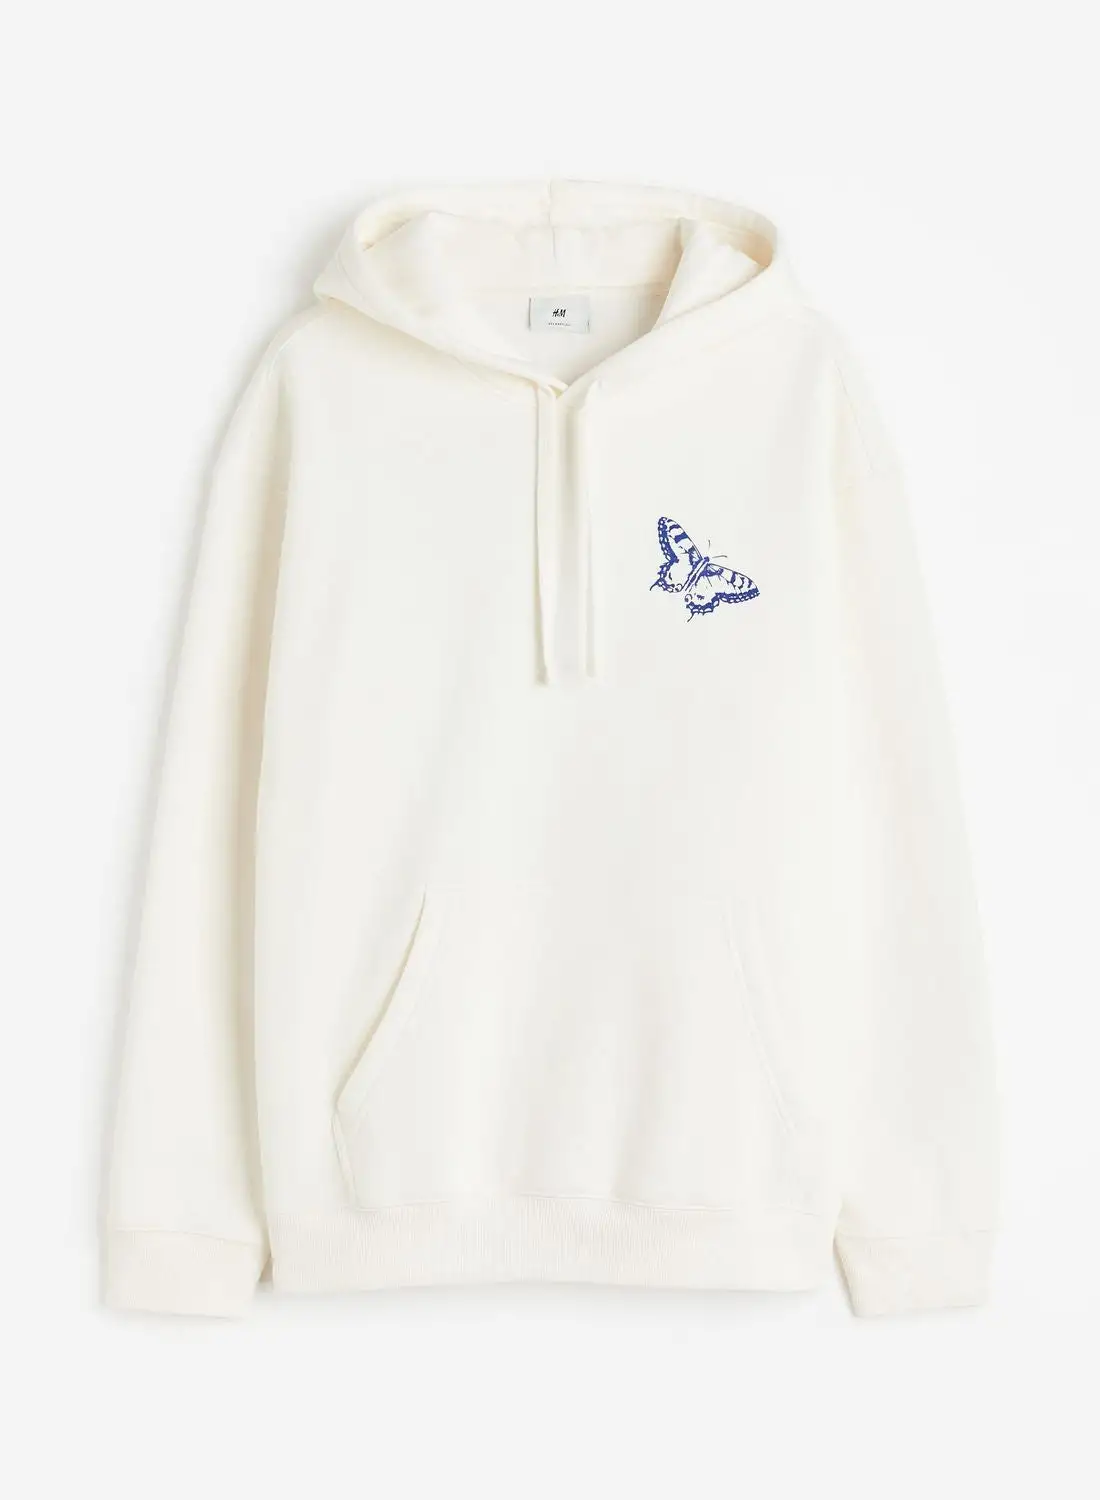 H&M Graphic Hoodie